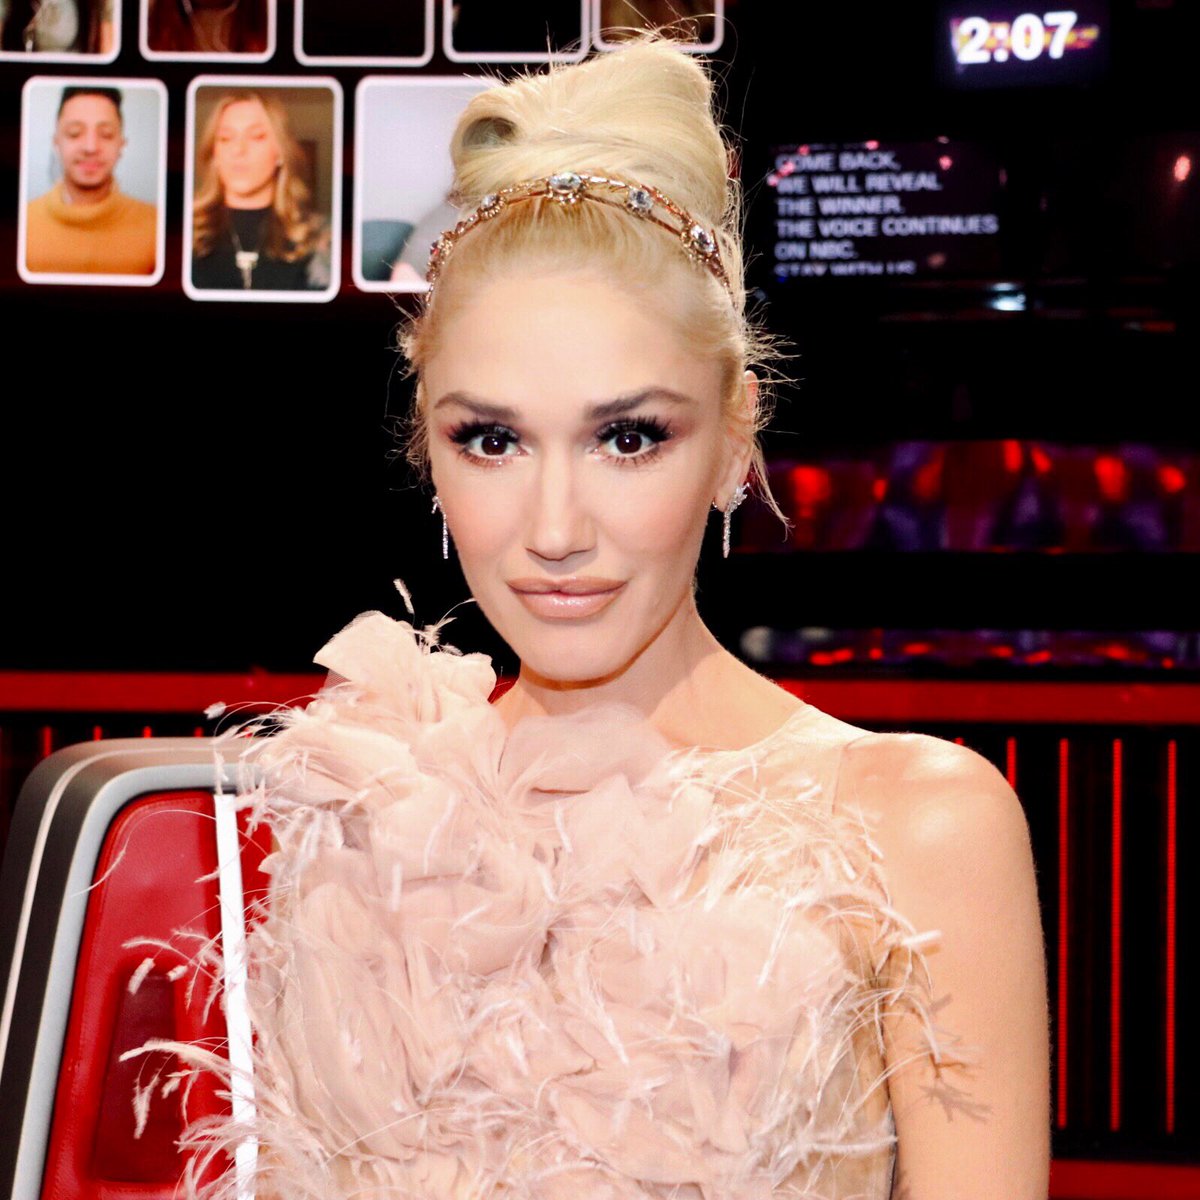 Gwen Stefani on X: "Can't believe we're down to the #VoiceTop9! @BenAllenband @carterjrubin, excited to see what you have in store on Monday. @josephsoulmusic @turner_payge, so proud of you both! ✨ gx #